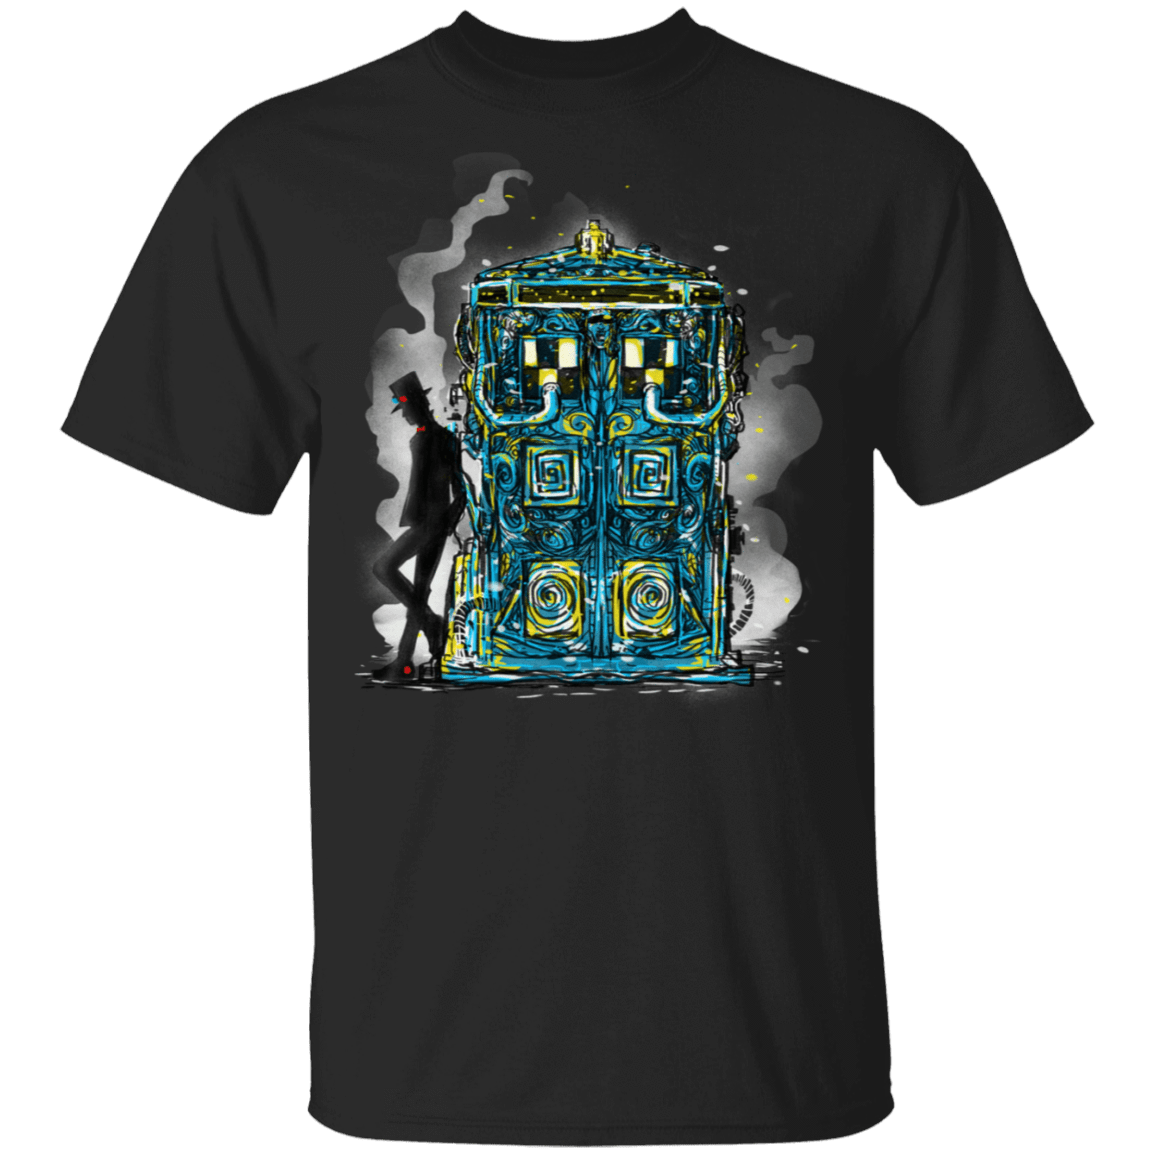 T-Shirts Black / S The Steam Doctor T-Shirt